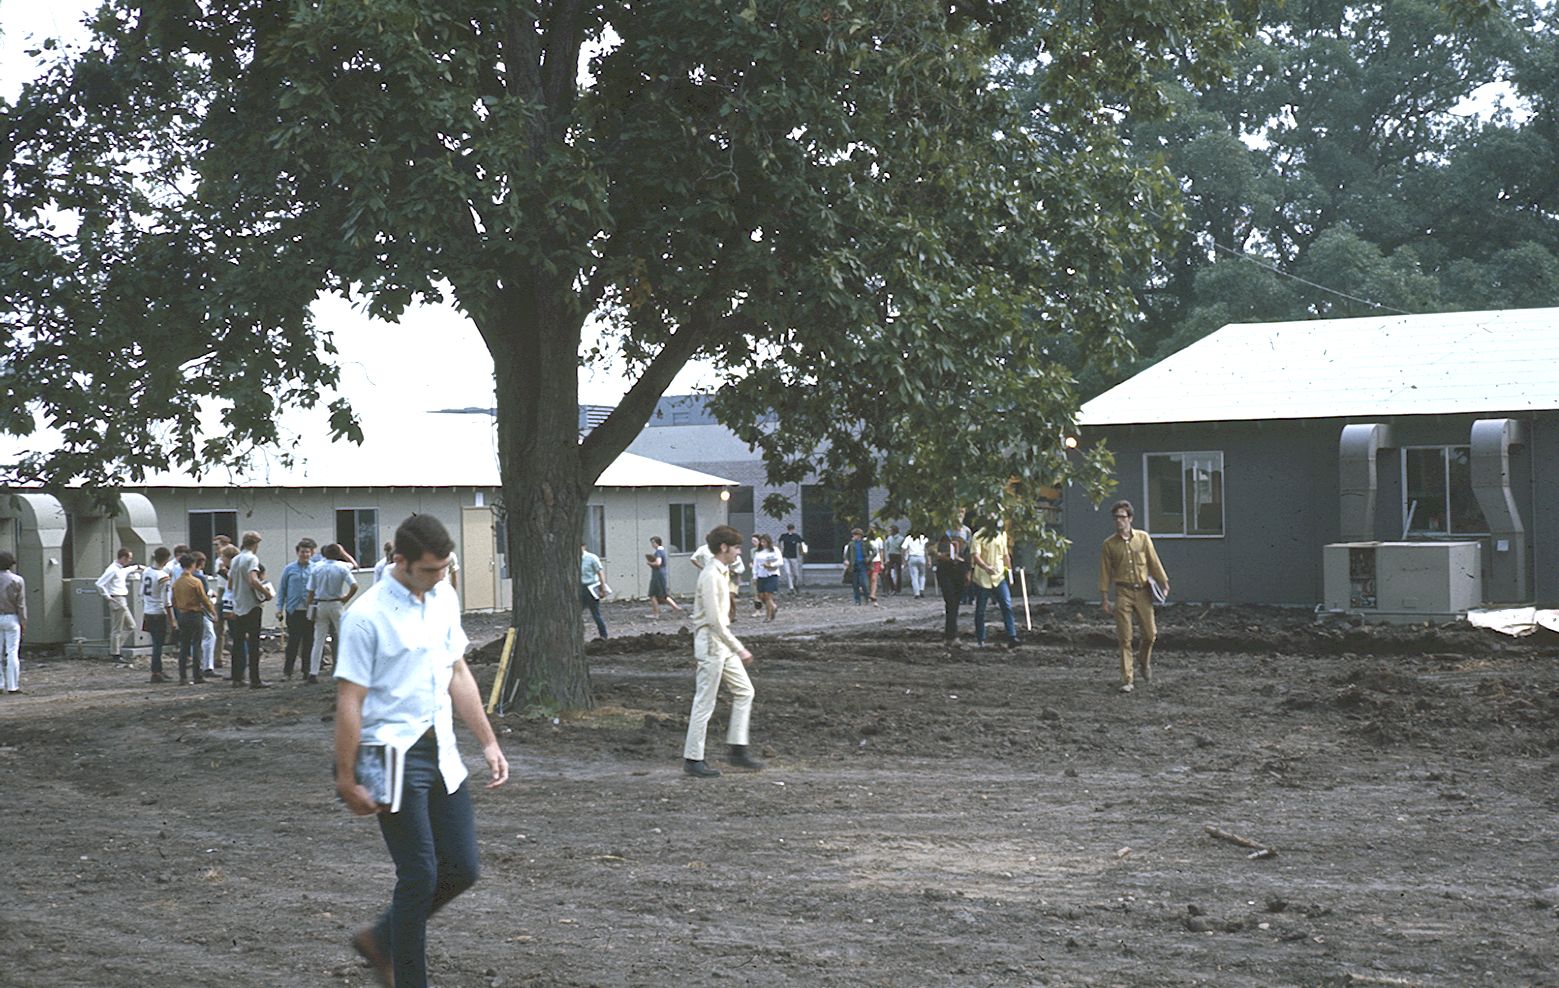 1969 Temporary Buildings on the Sugar Grove Campus